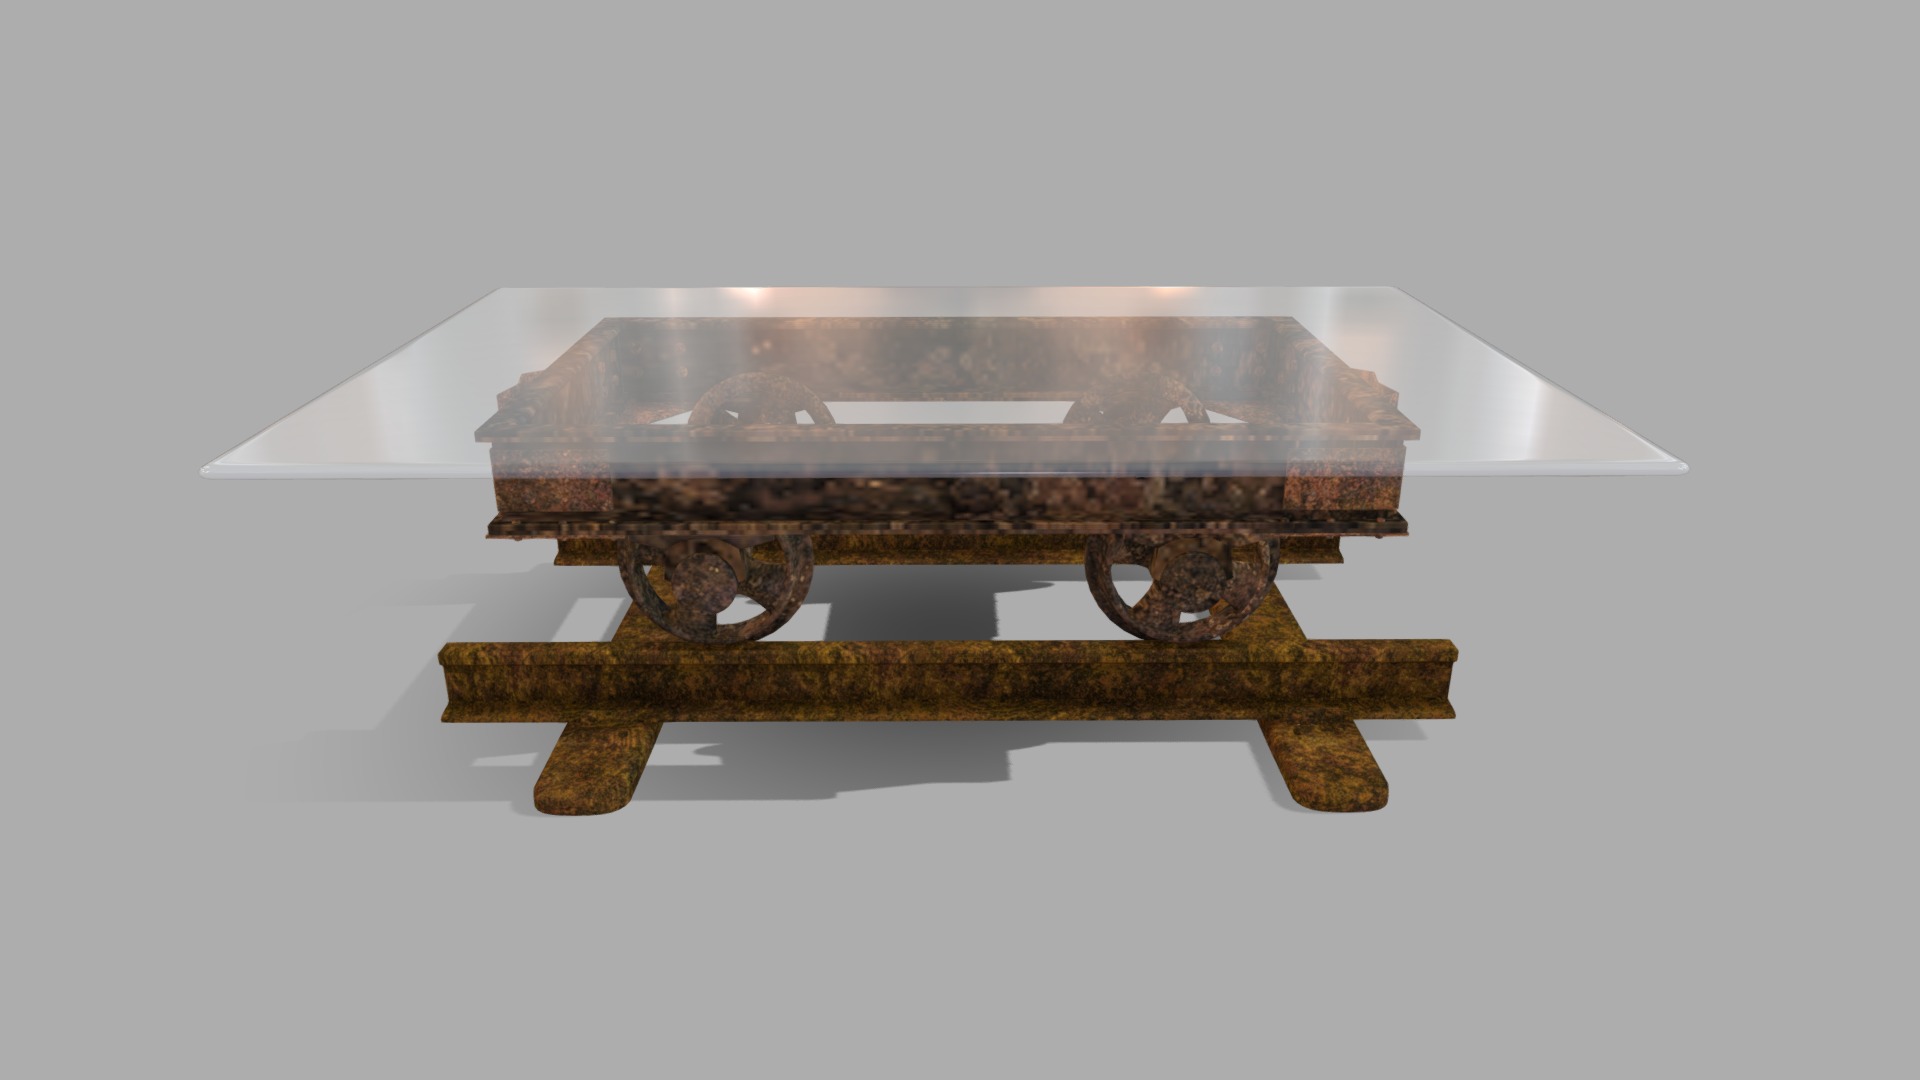 3D model Railroad Cart Coffee Table - This is a 3D model of the Railroad Cart Coffee Table. The 3D model is about a wooden table with a metal top.